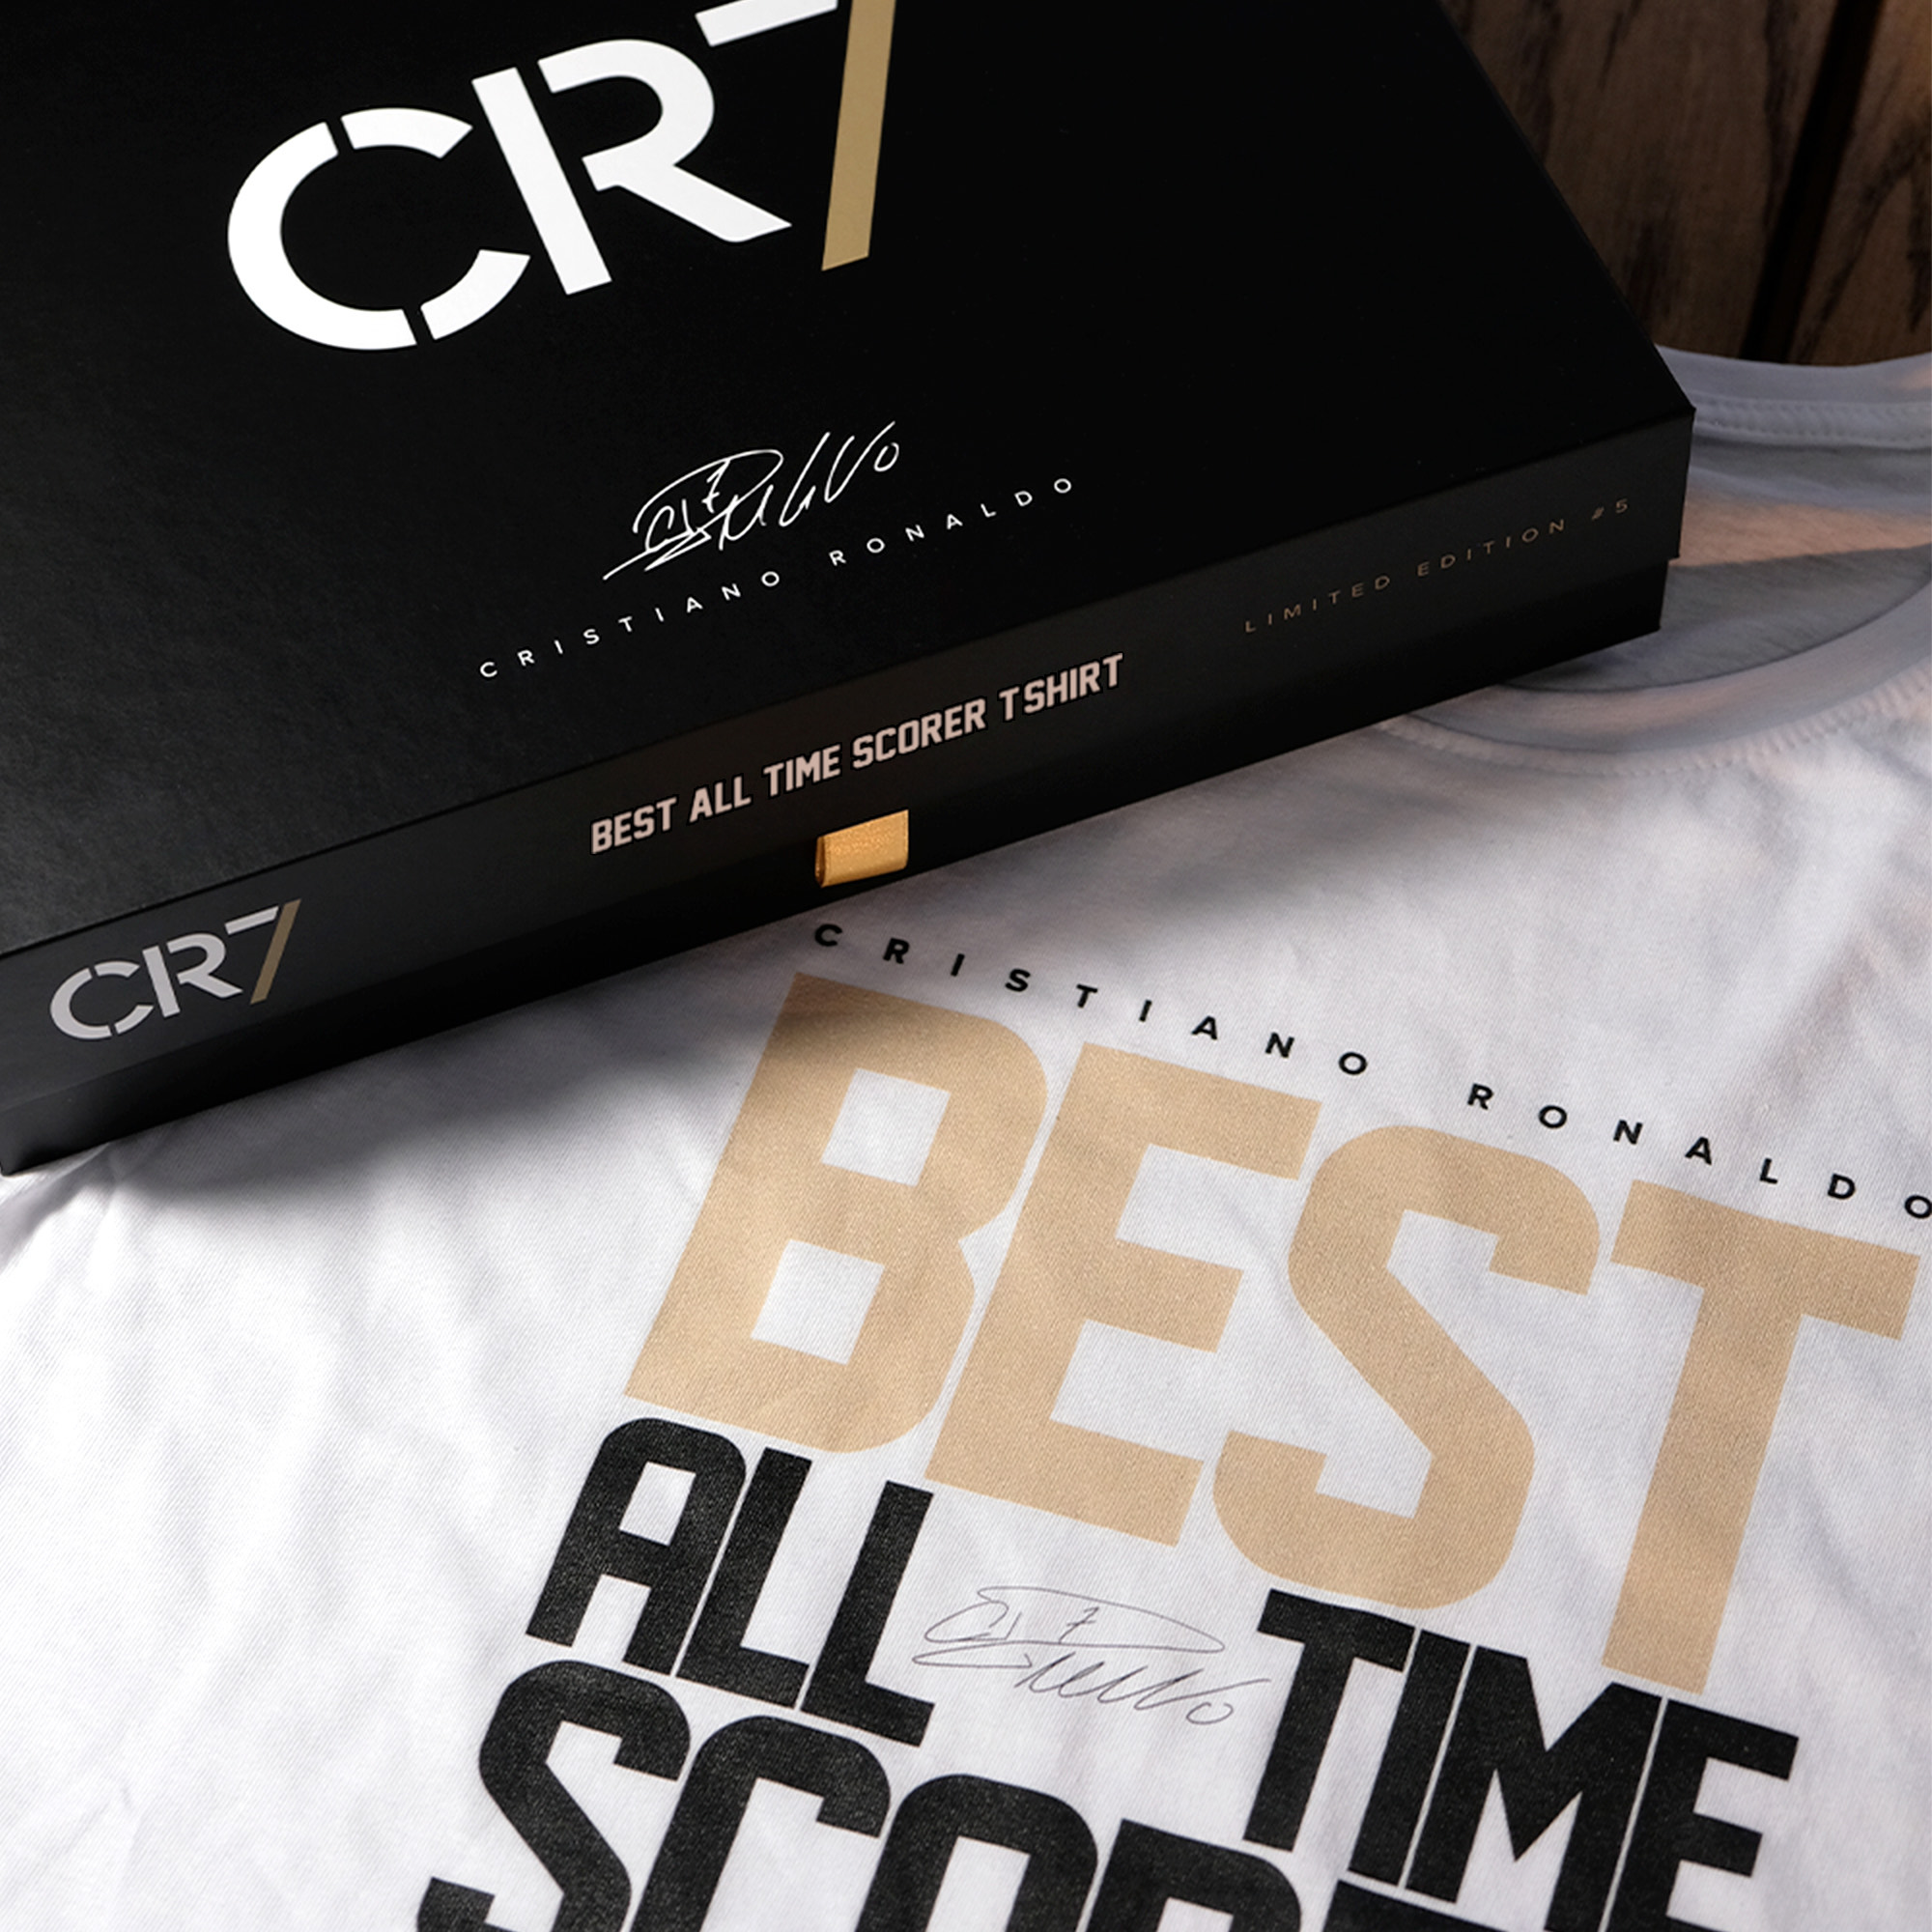 TSHIRT BEST ALL TIME SCORER – LIMITED EDITION – CR7 Museum